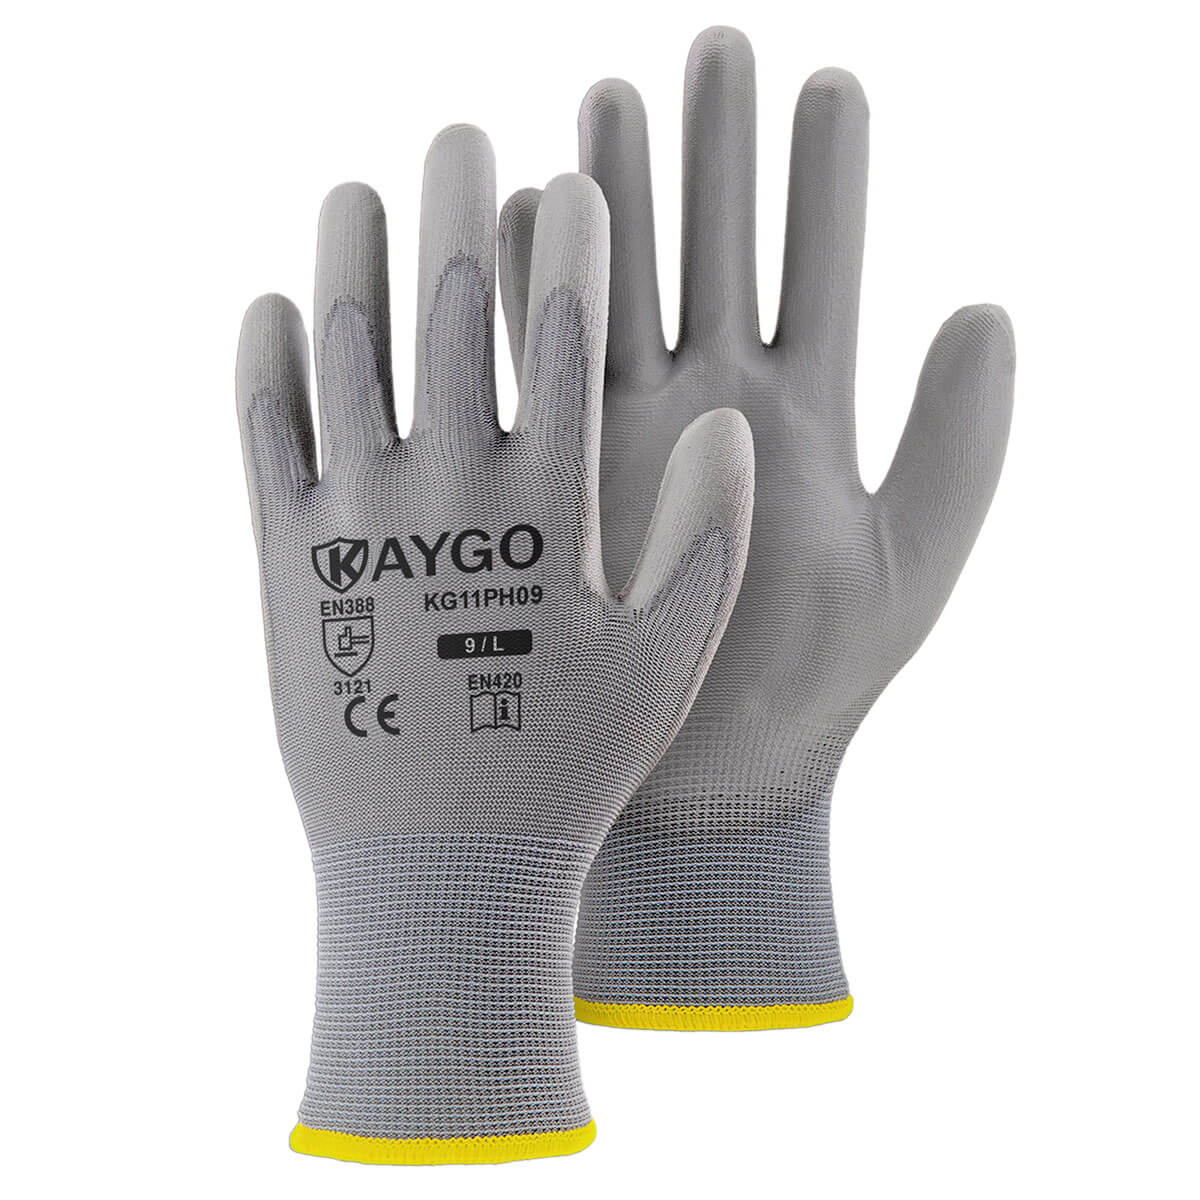 Work Gloves for Men and Women 12 Pairs, KAYGO Kg11p, Seamless Knit Working Glove with Polyurethane Coated for General Purpose, Adult Unisex, Size